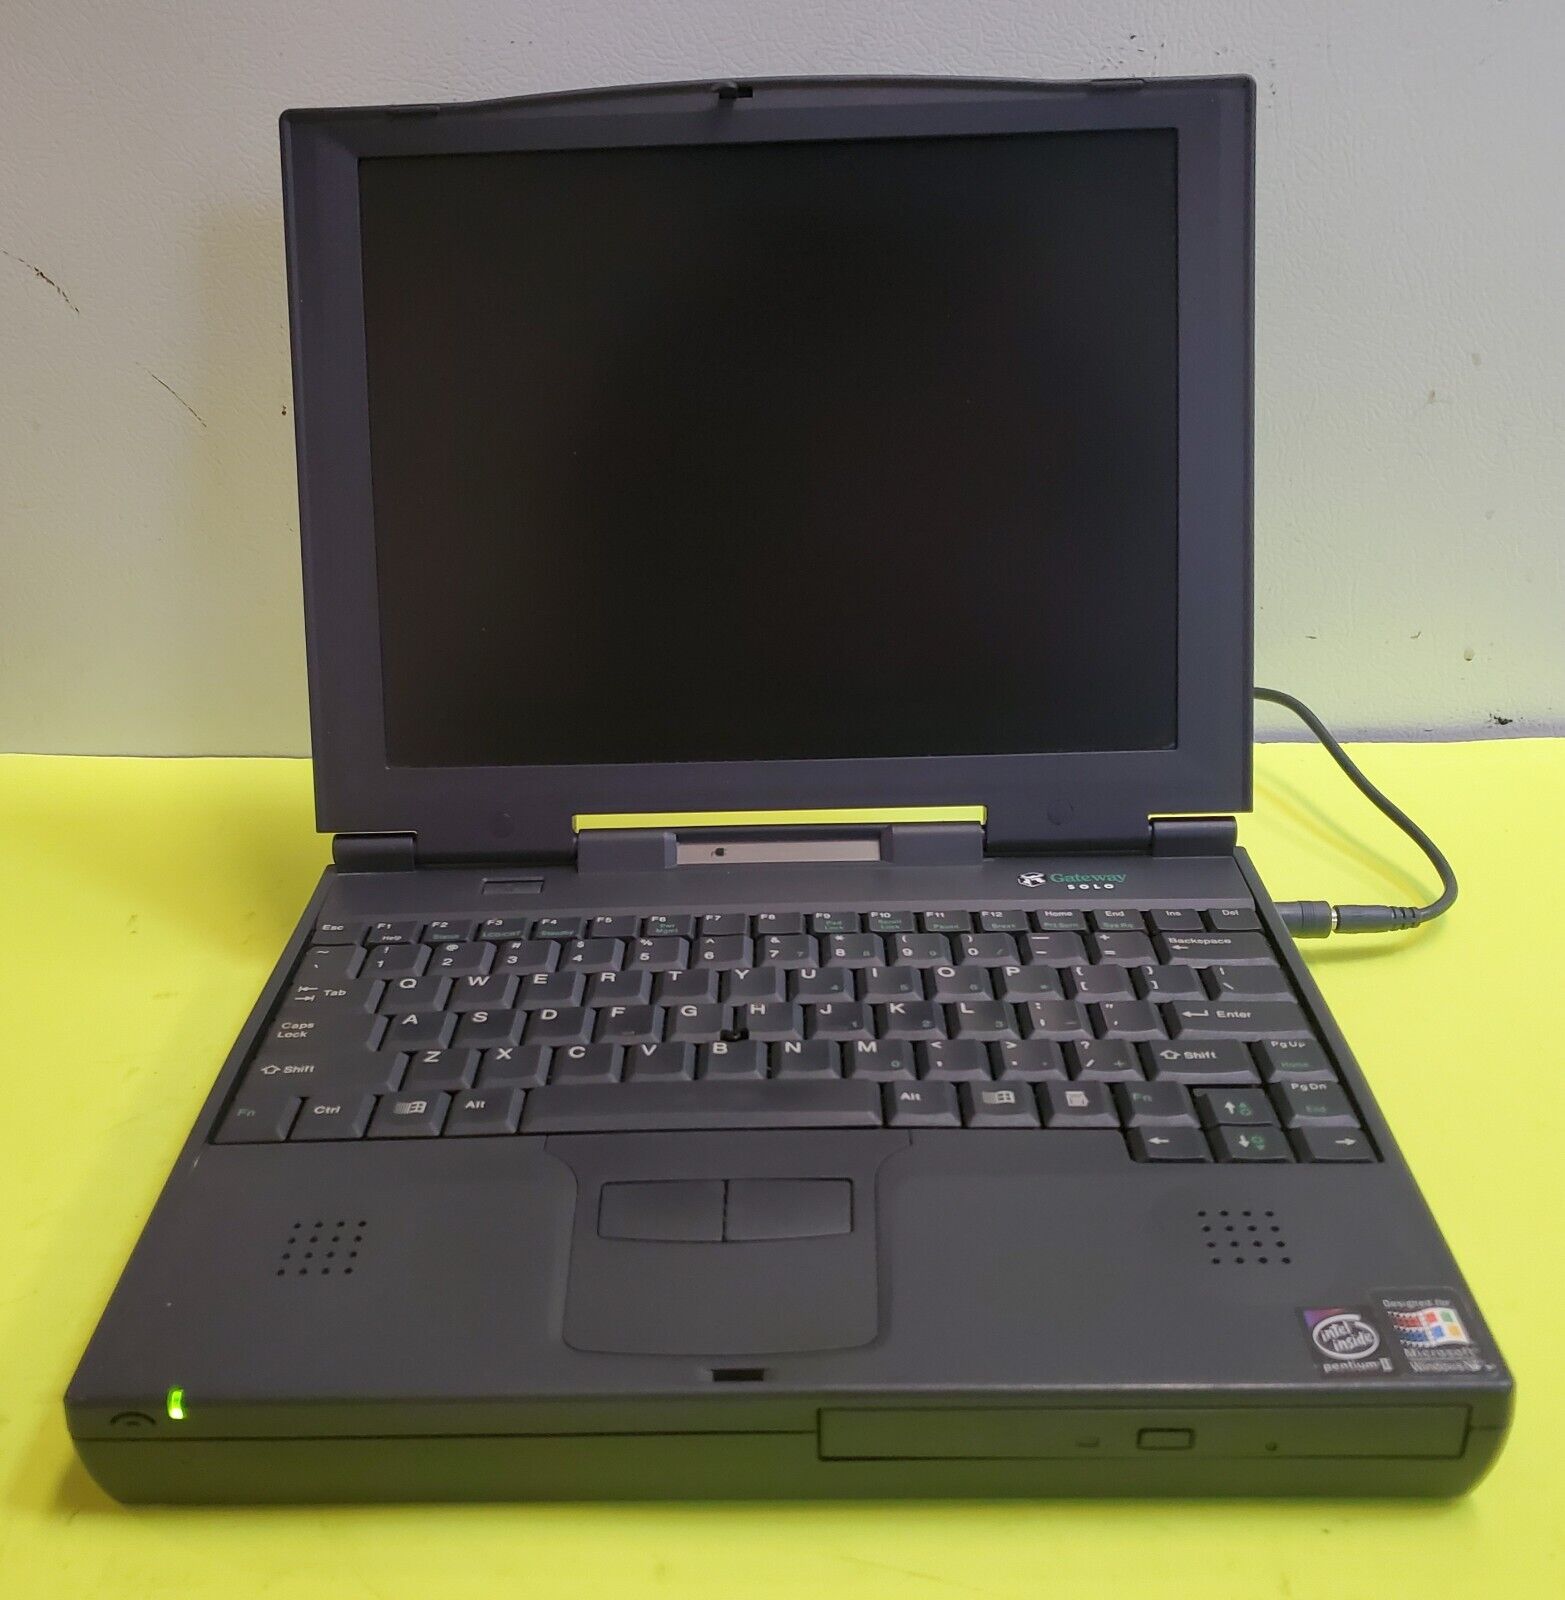 Retro Gateway Solo Model 2500 Notebook Laptop Computer Vintage - Sold As Is